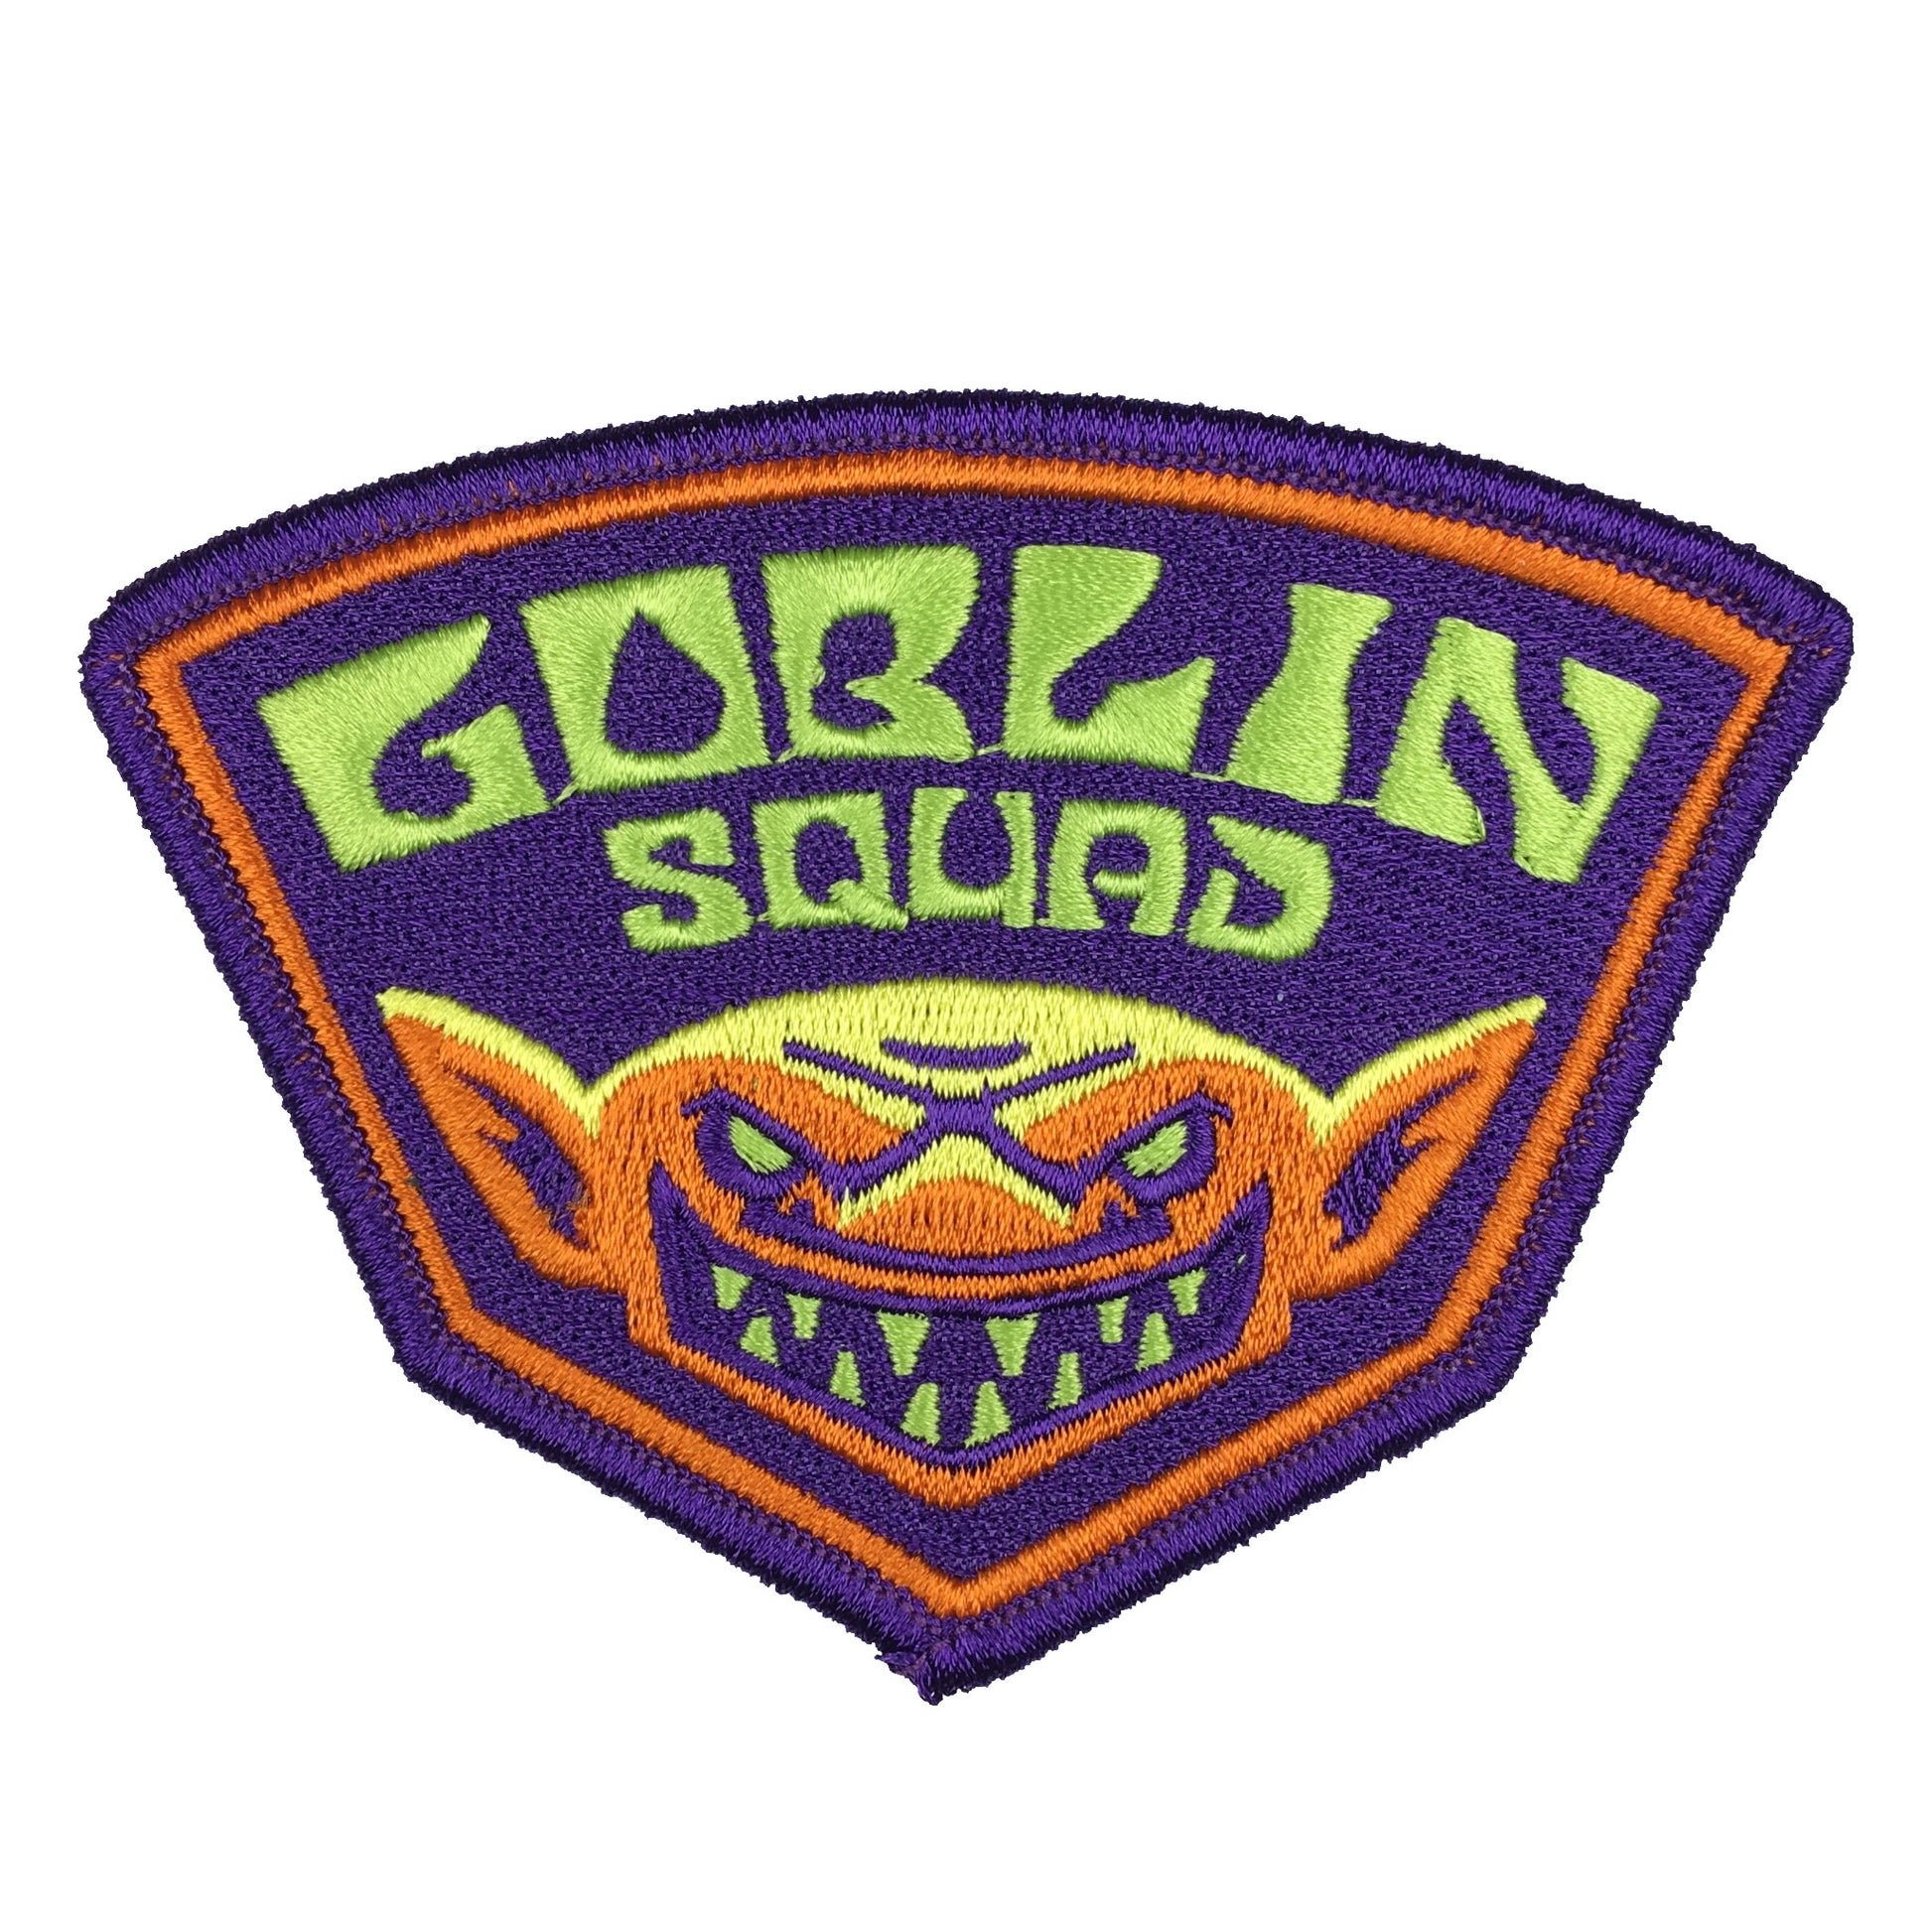 Goblin Squad folklore mythology creature embroidered patch 